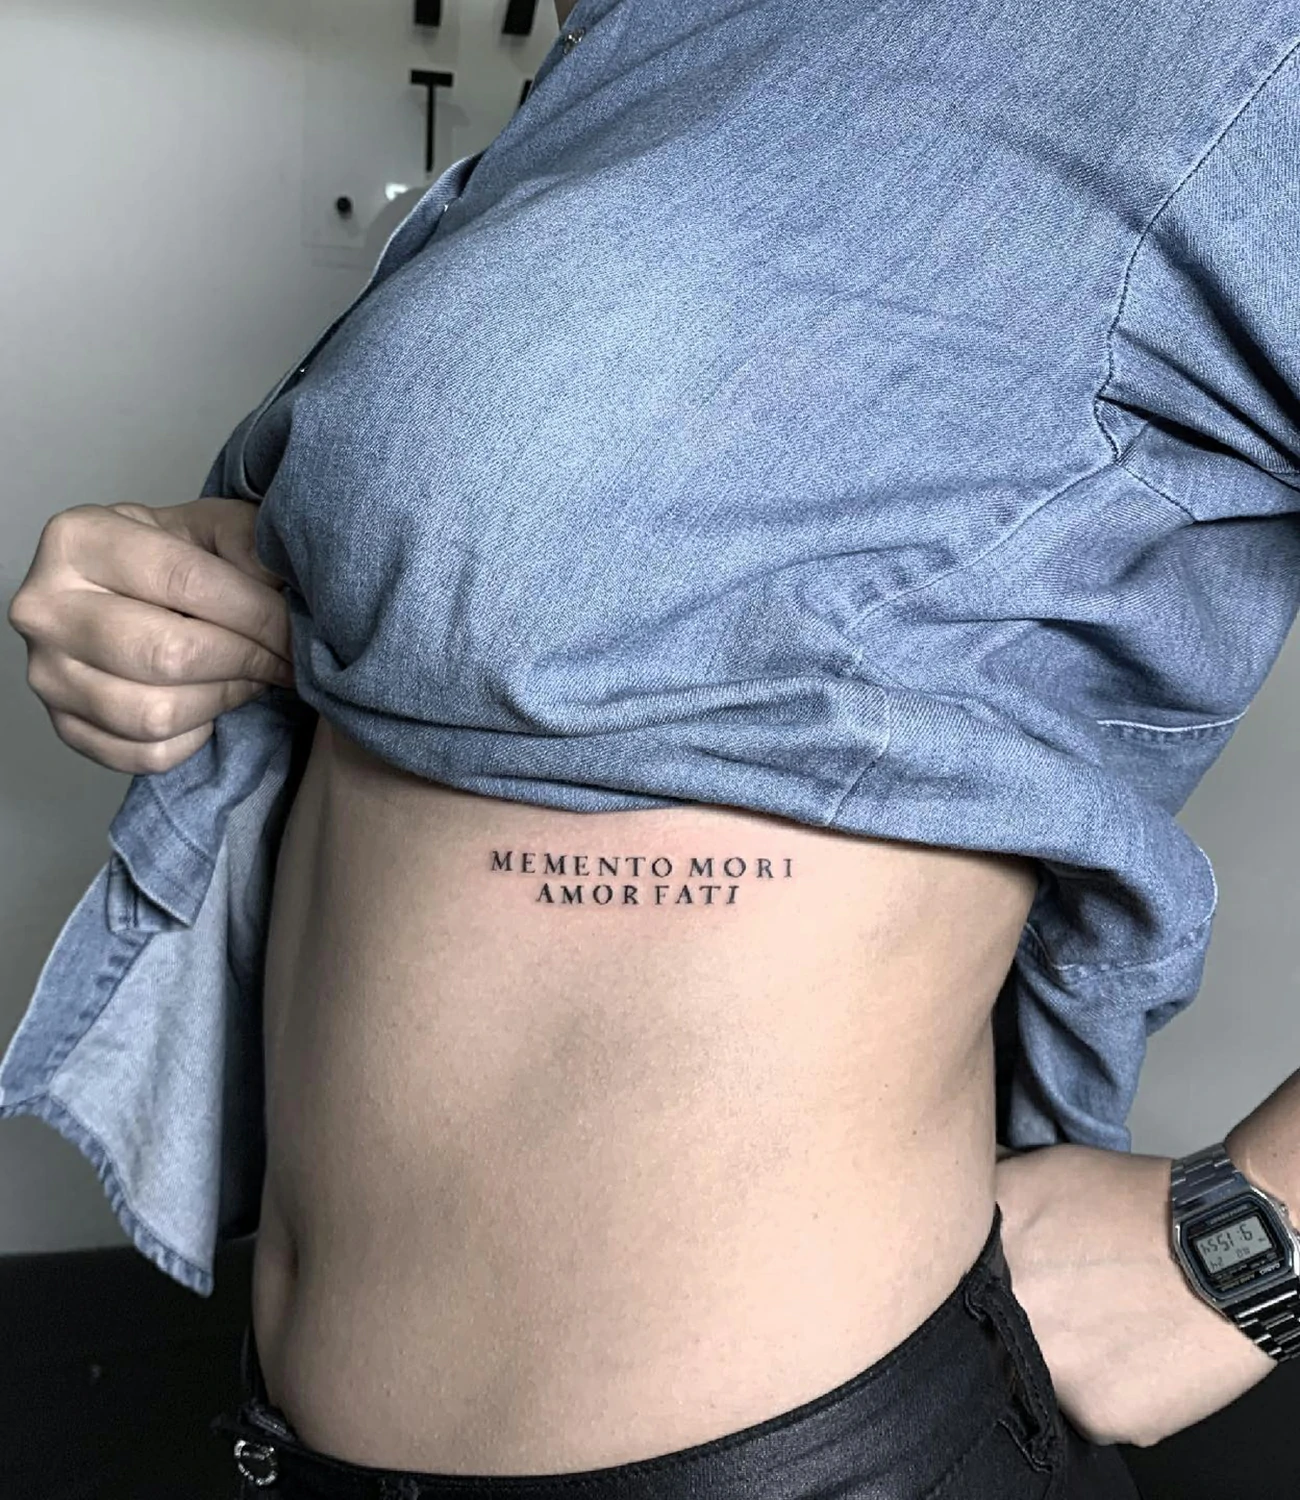 memento mori amor fati tattoo: A tattoo combining the phrases "memento mori" and "amor fati," possibly integrating symbols like a skull and a heart or an infinity sign.